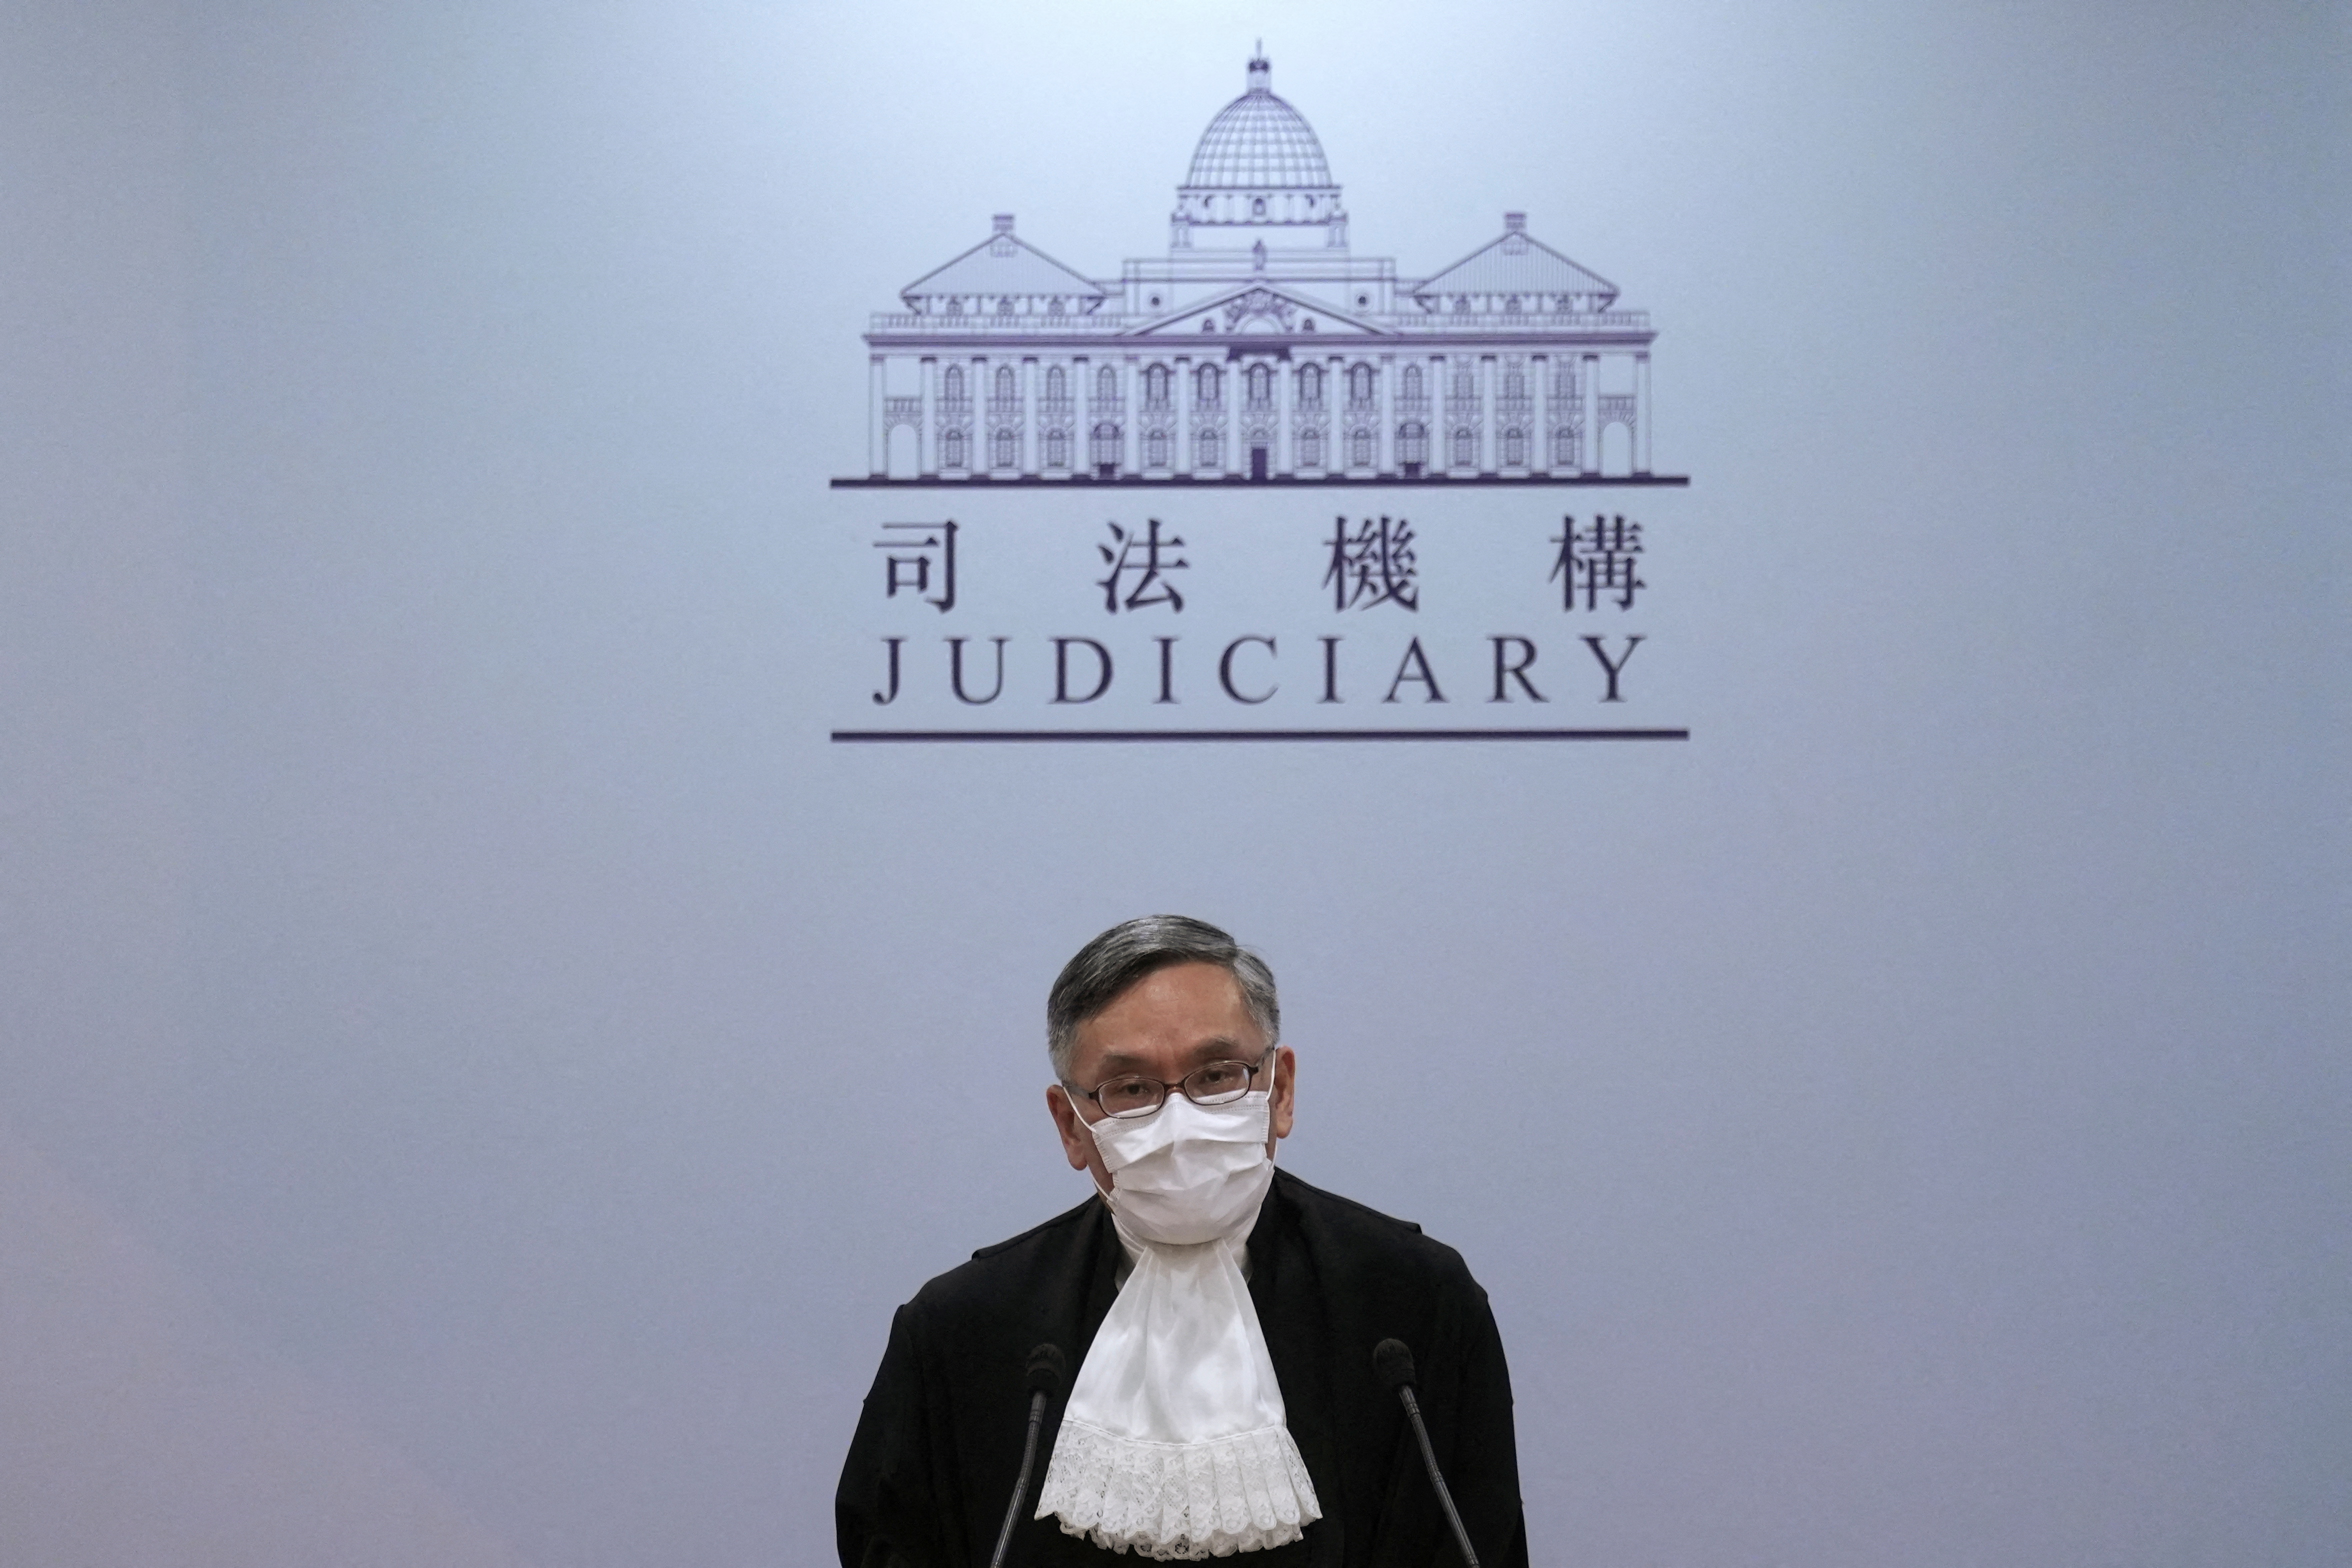 Hong Kong Chief Justice Andrew Cheung meets media after the ceremonial opening marking the new legal year in Hong Kong